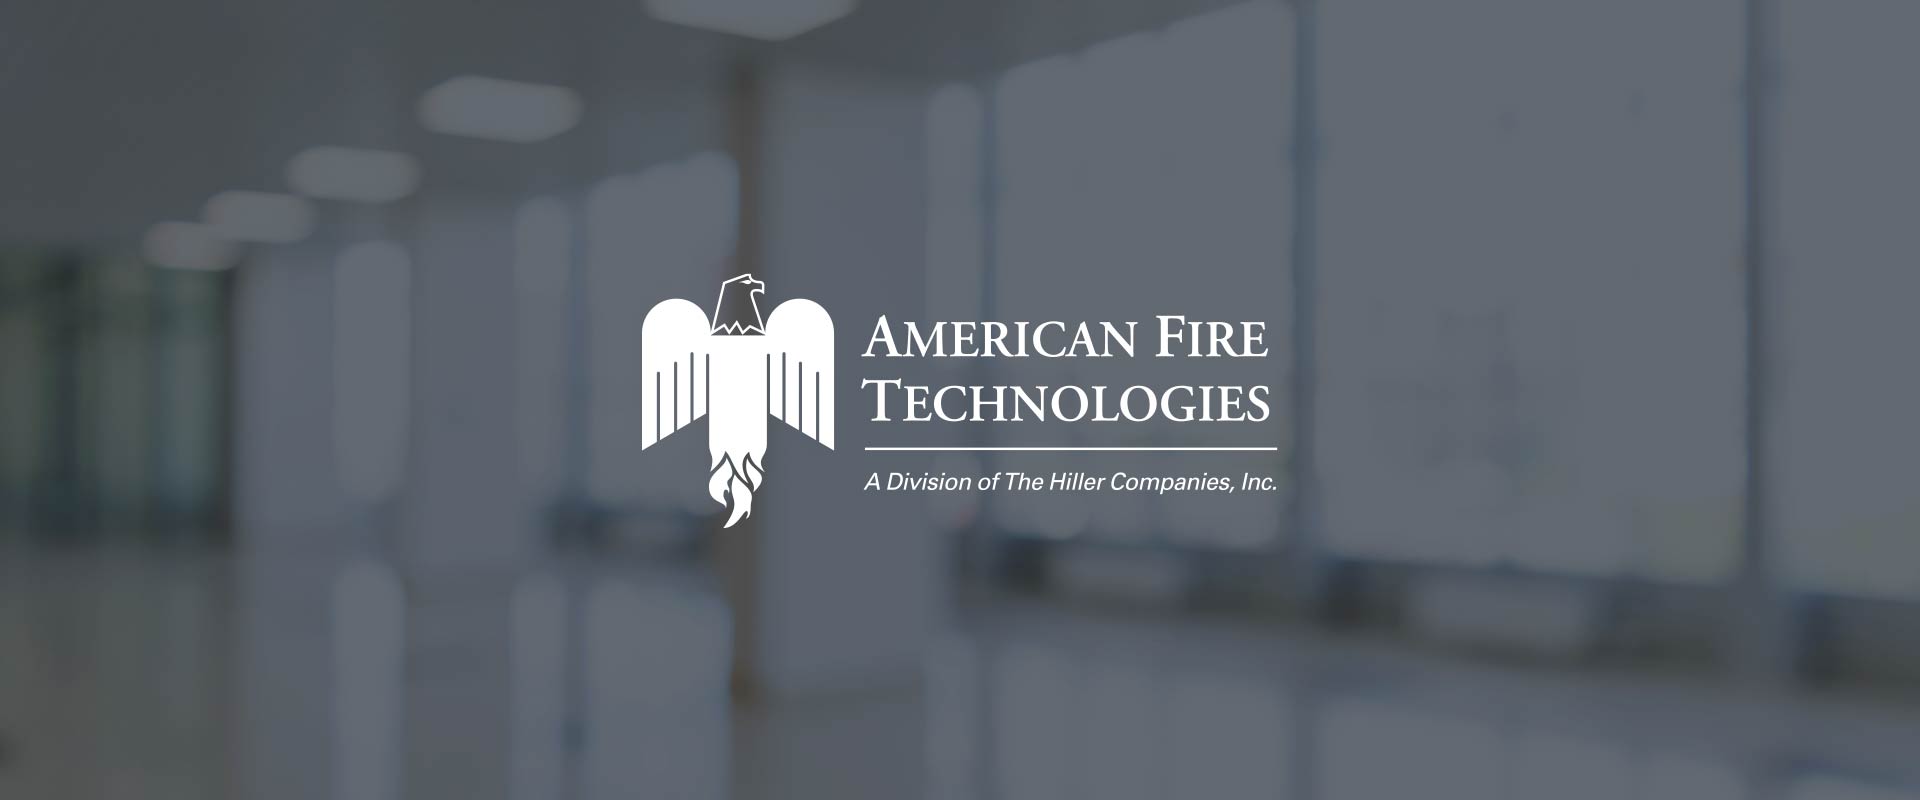 The Hiller Companies Announces the Purchase of American Fire Technologies